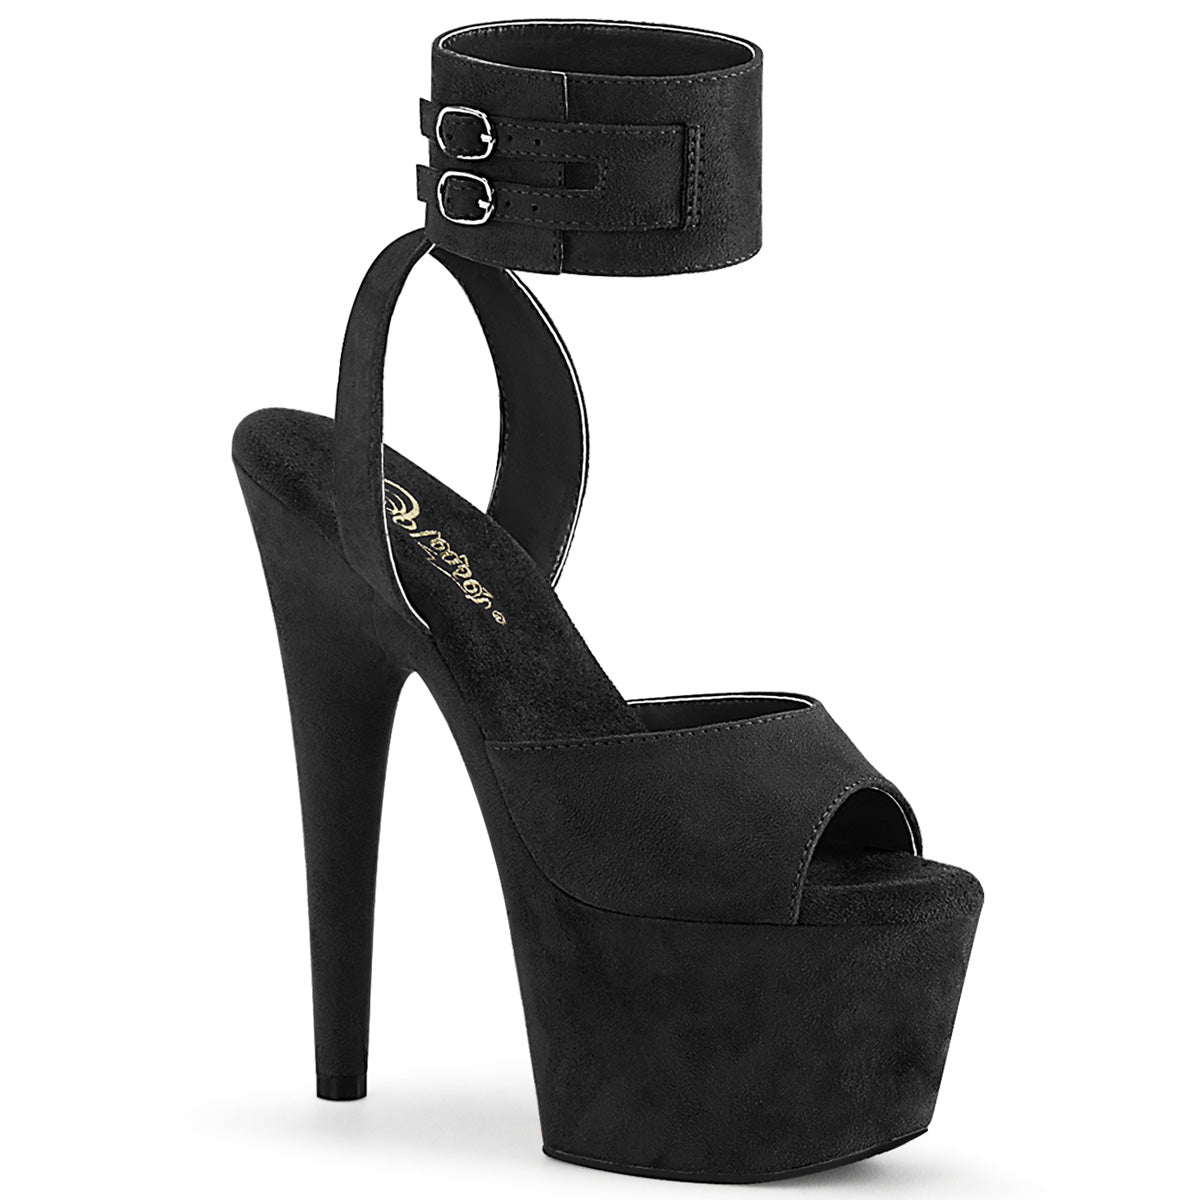 ADORE-791FS Pleaser 7 Inch Heel Black Pole Dancing Shoes-Pleaser- Sexy Shoes